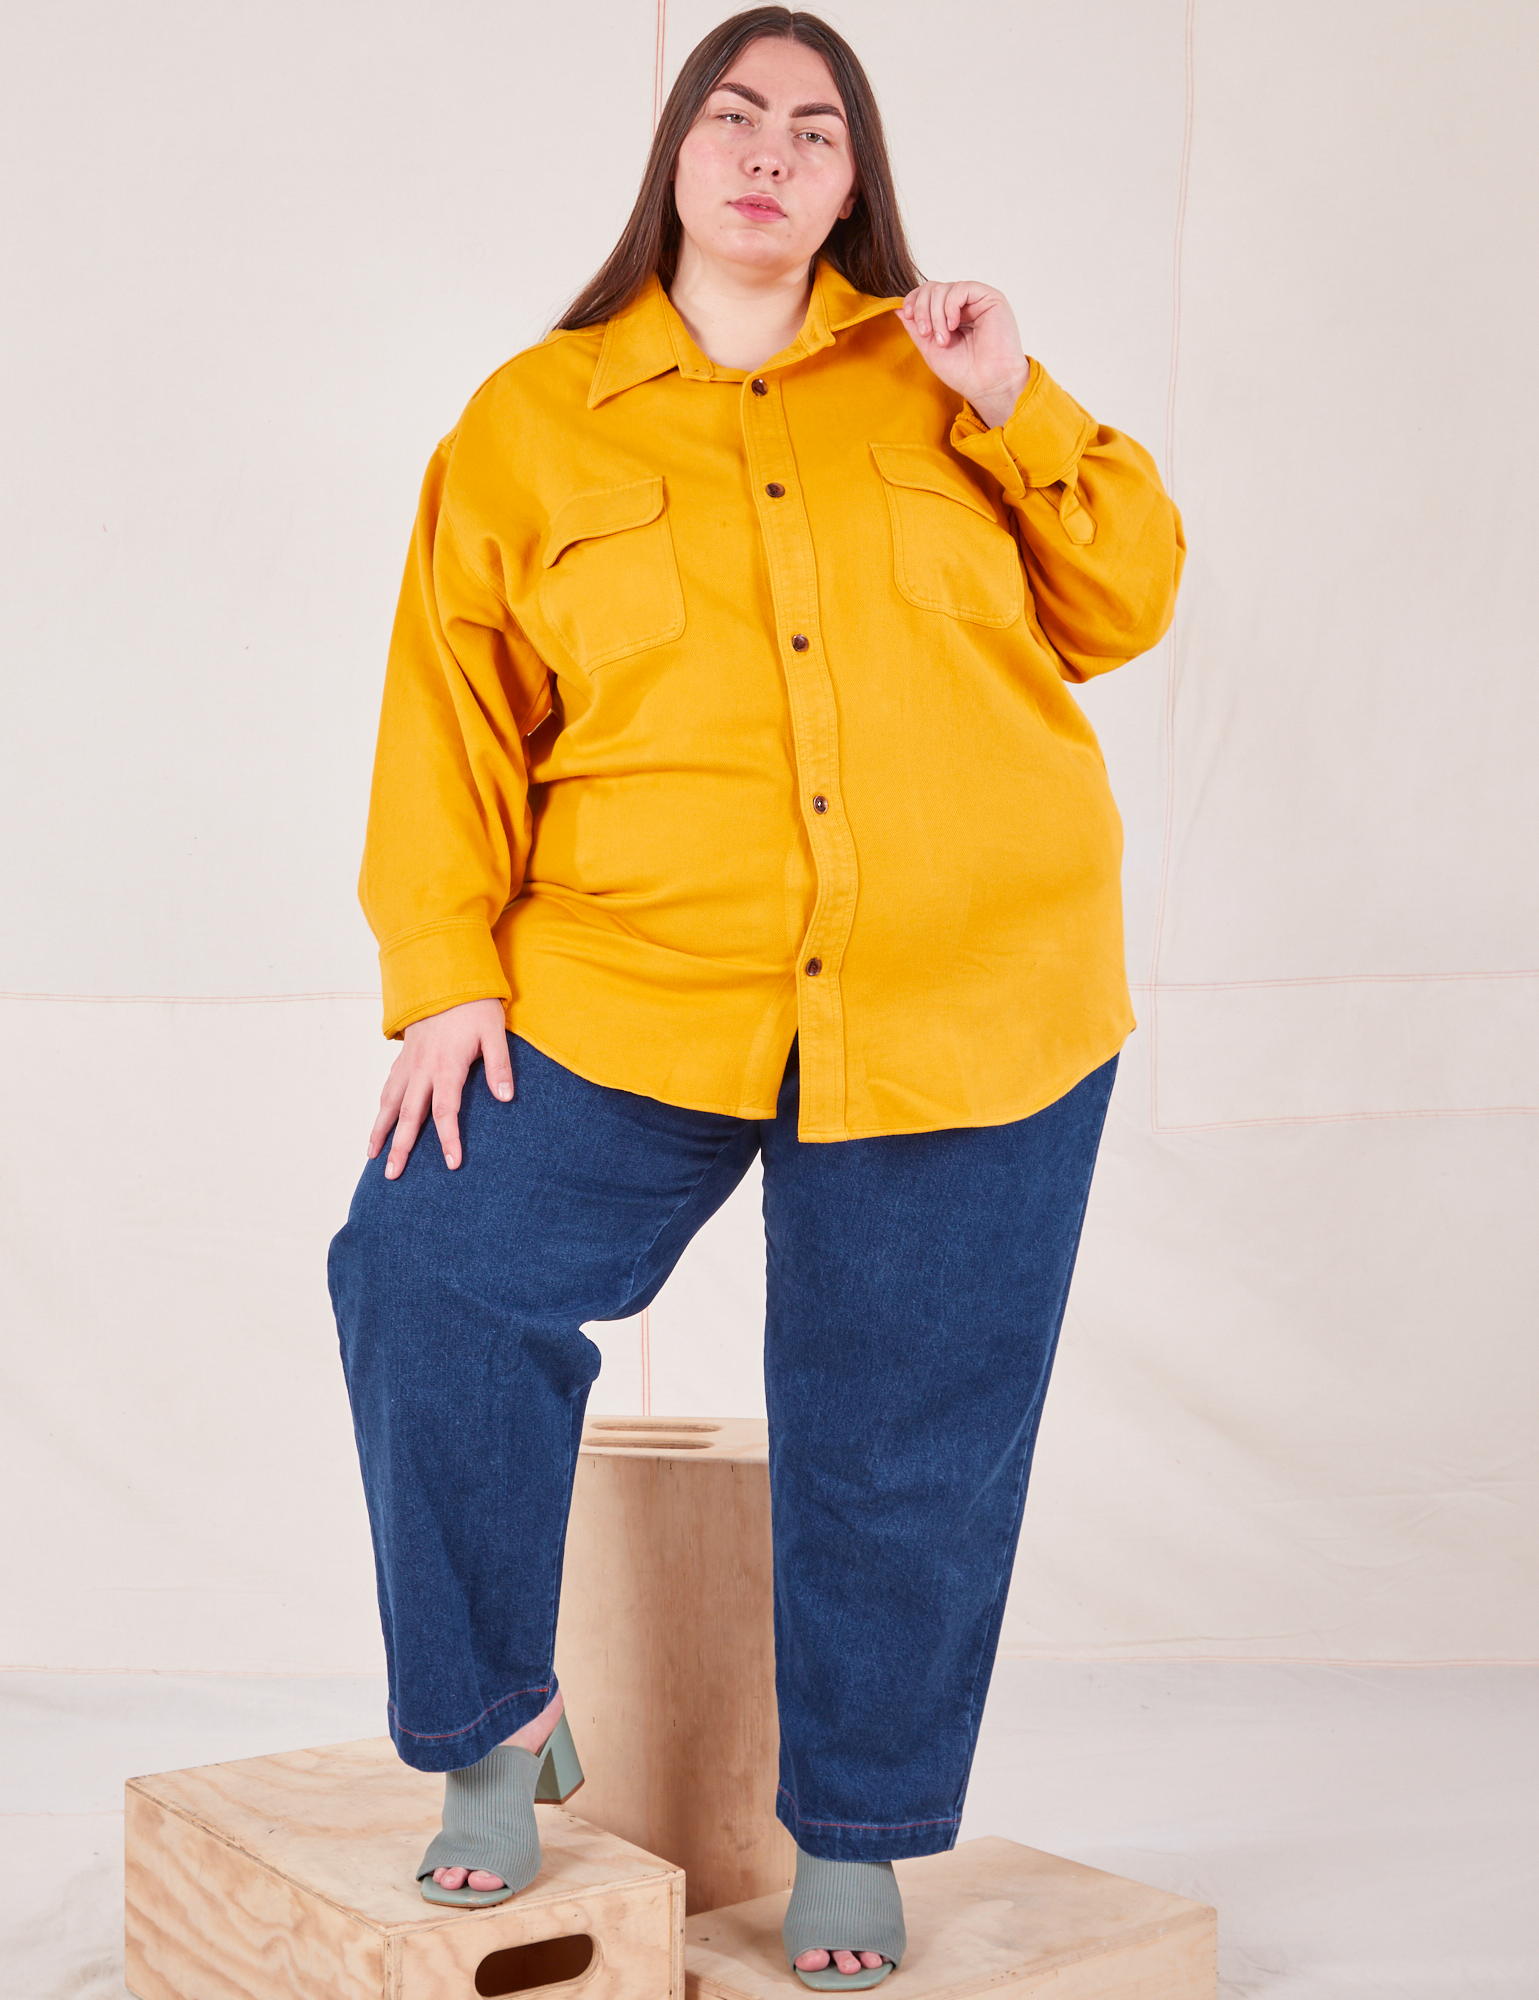 Marielena is wearing a buttoned up Flannel Overshirt in Mustard Yellow paired with dark wash Trouser Jeans